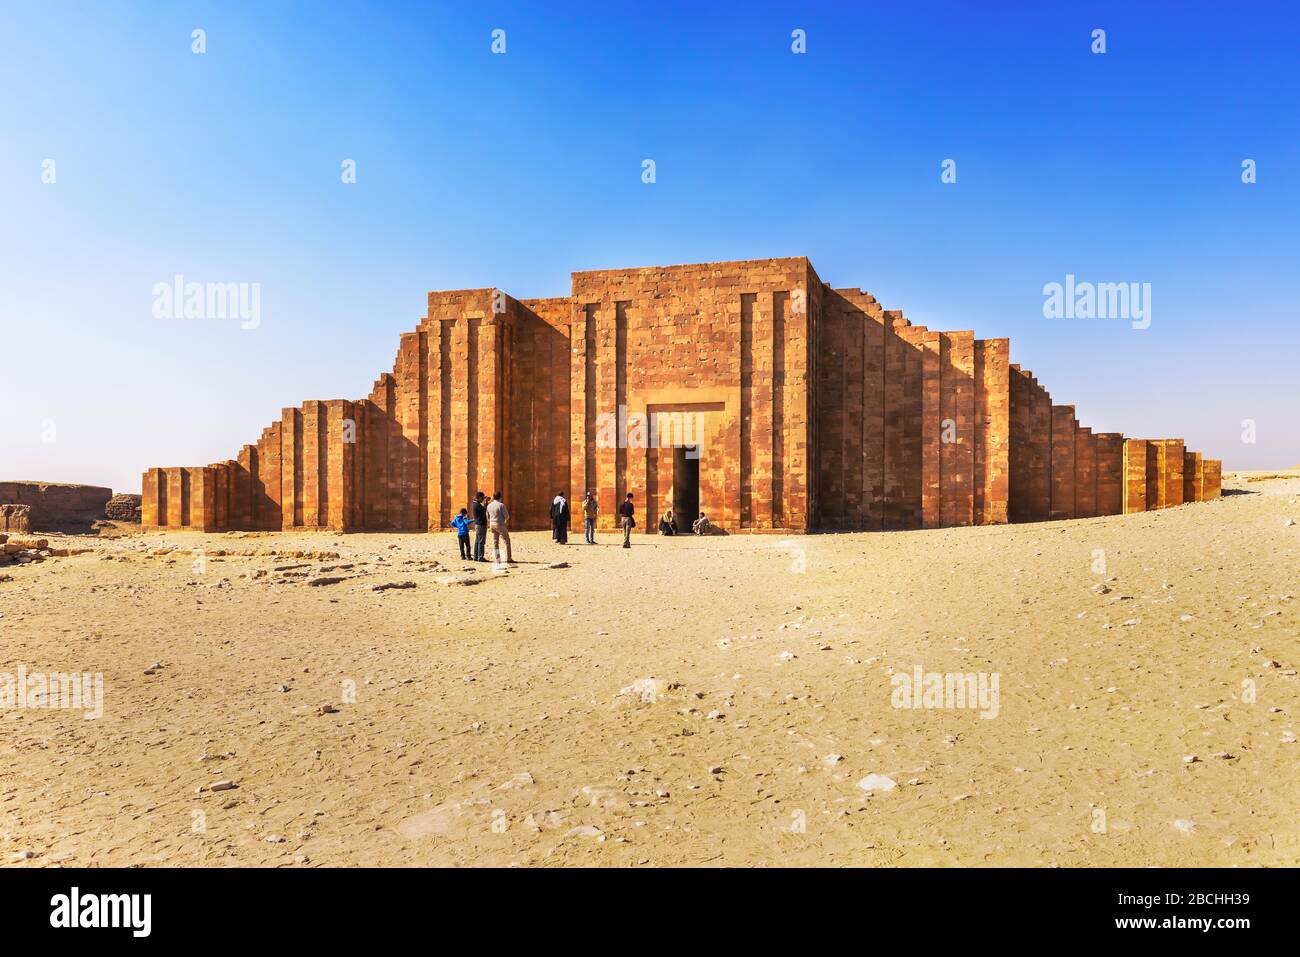 Saqqara, Egypt - December 31, 2014: Tourists in front of  the Saqqara Necropolis, which is a UNESCO World Heritage located near Cairo, Egypt Stock Photo